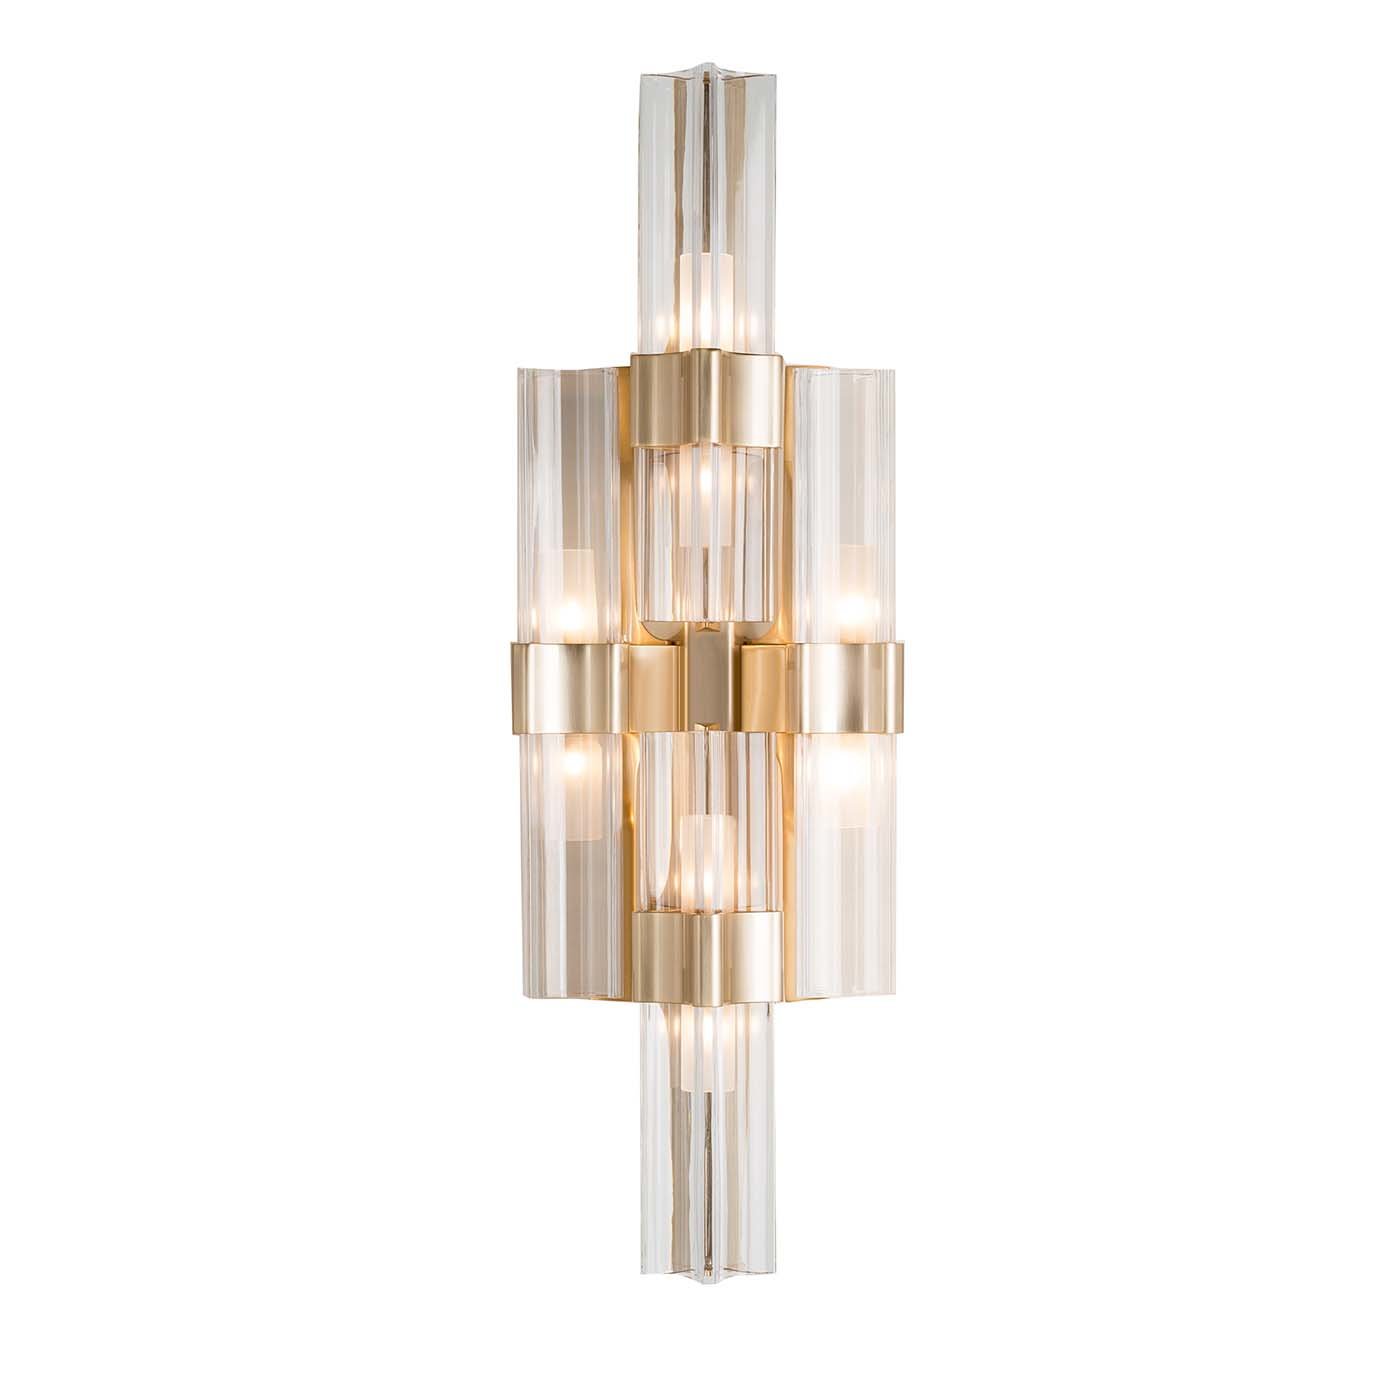 Eterea Wall Lamp Gold Crystal by Emanuela Benedetti - Main view